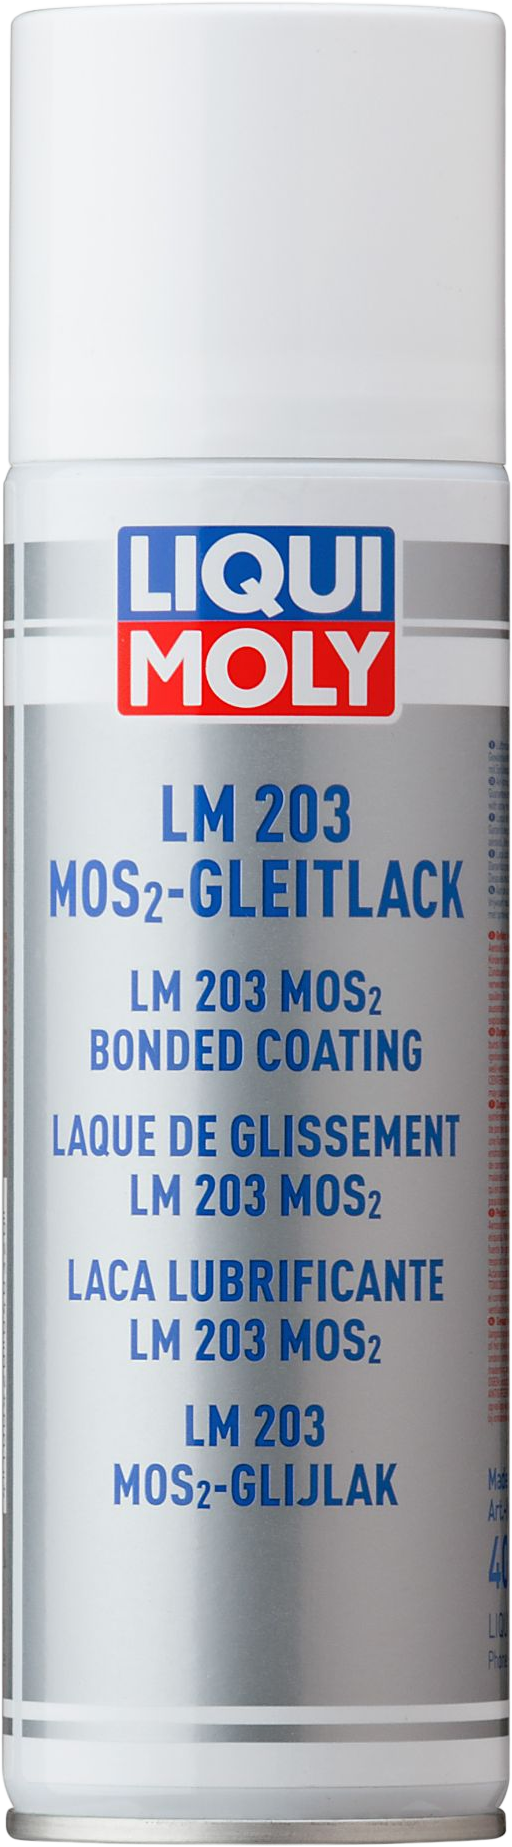 Liqui Moly LM 203 MoS2 Anti-Friction Lacquer, 300 ml